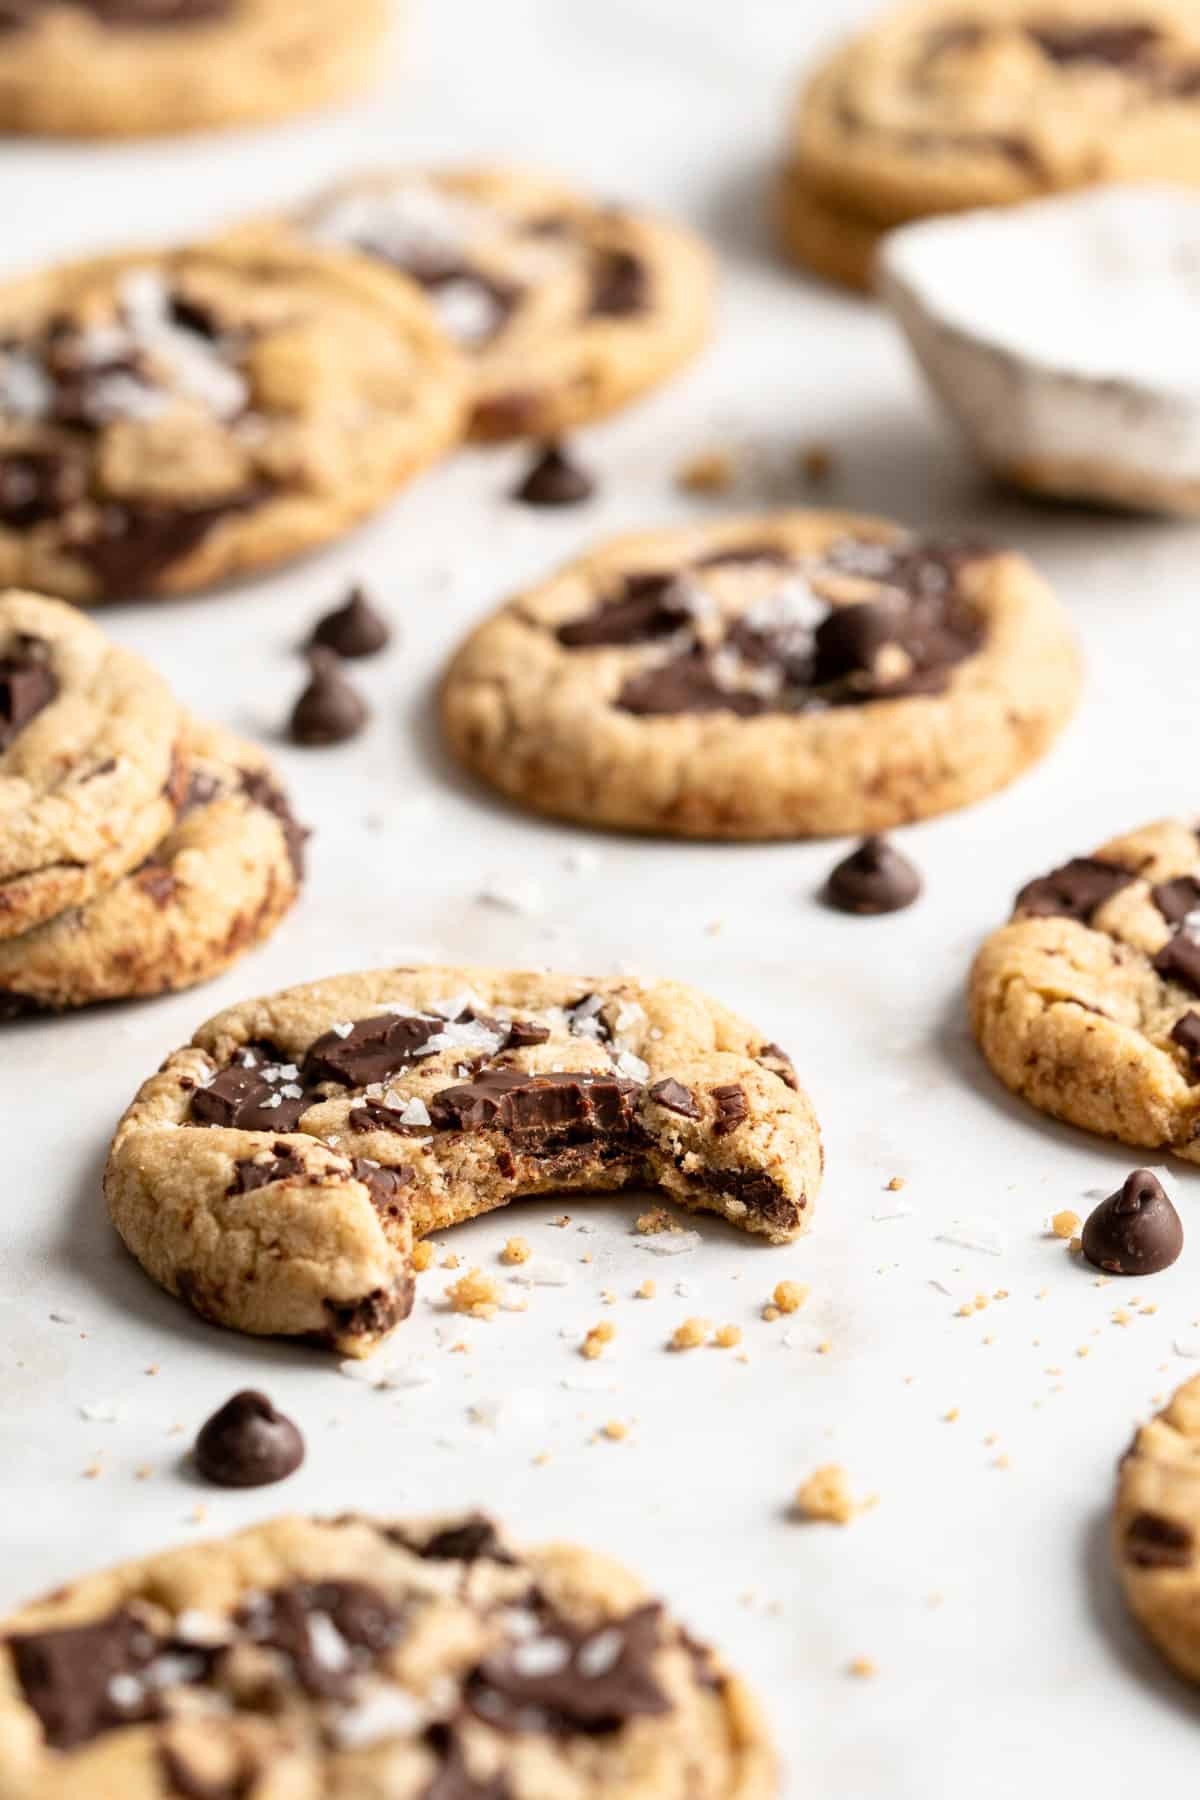 Vegan chocolate chip cookies on parchment paper, one with bite removed